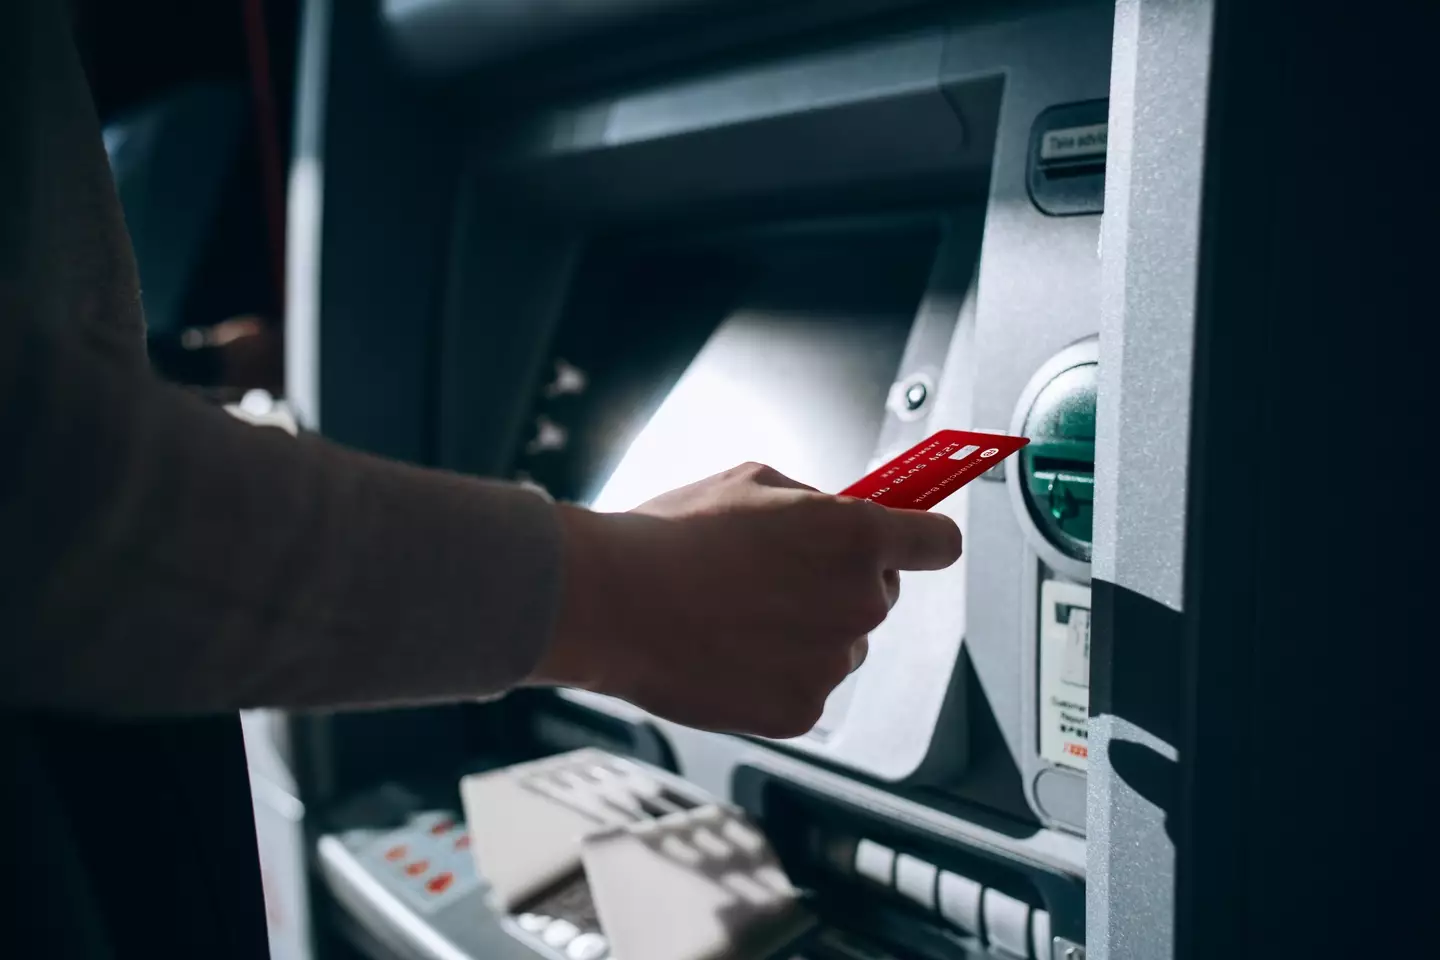 ATM machines appear to be a very lucrative business.